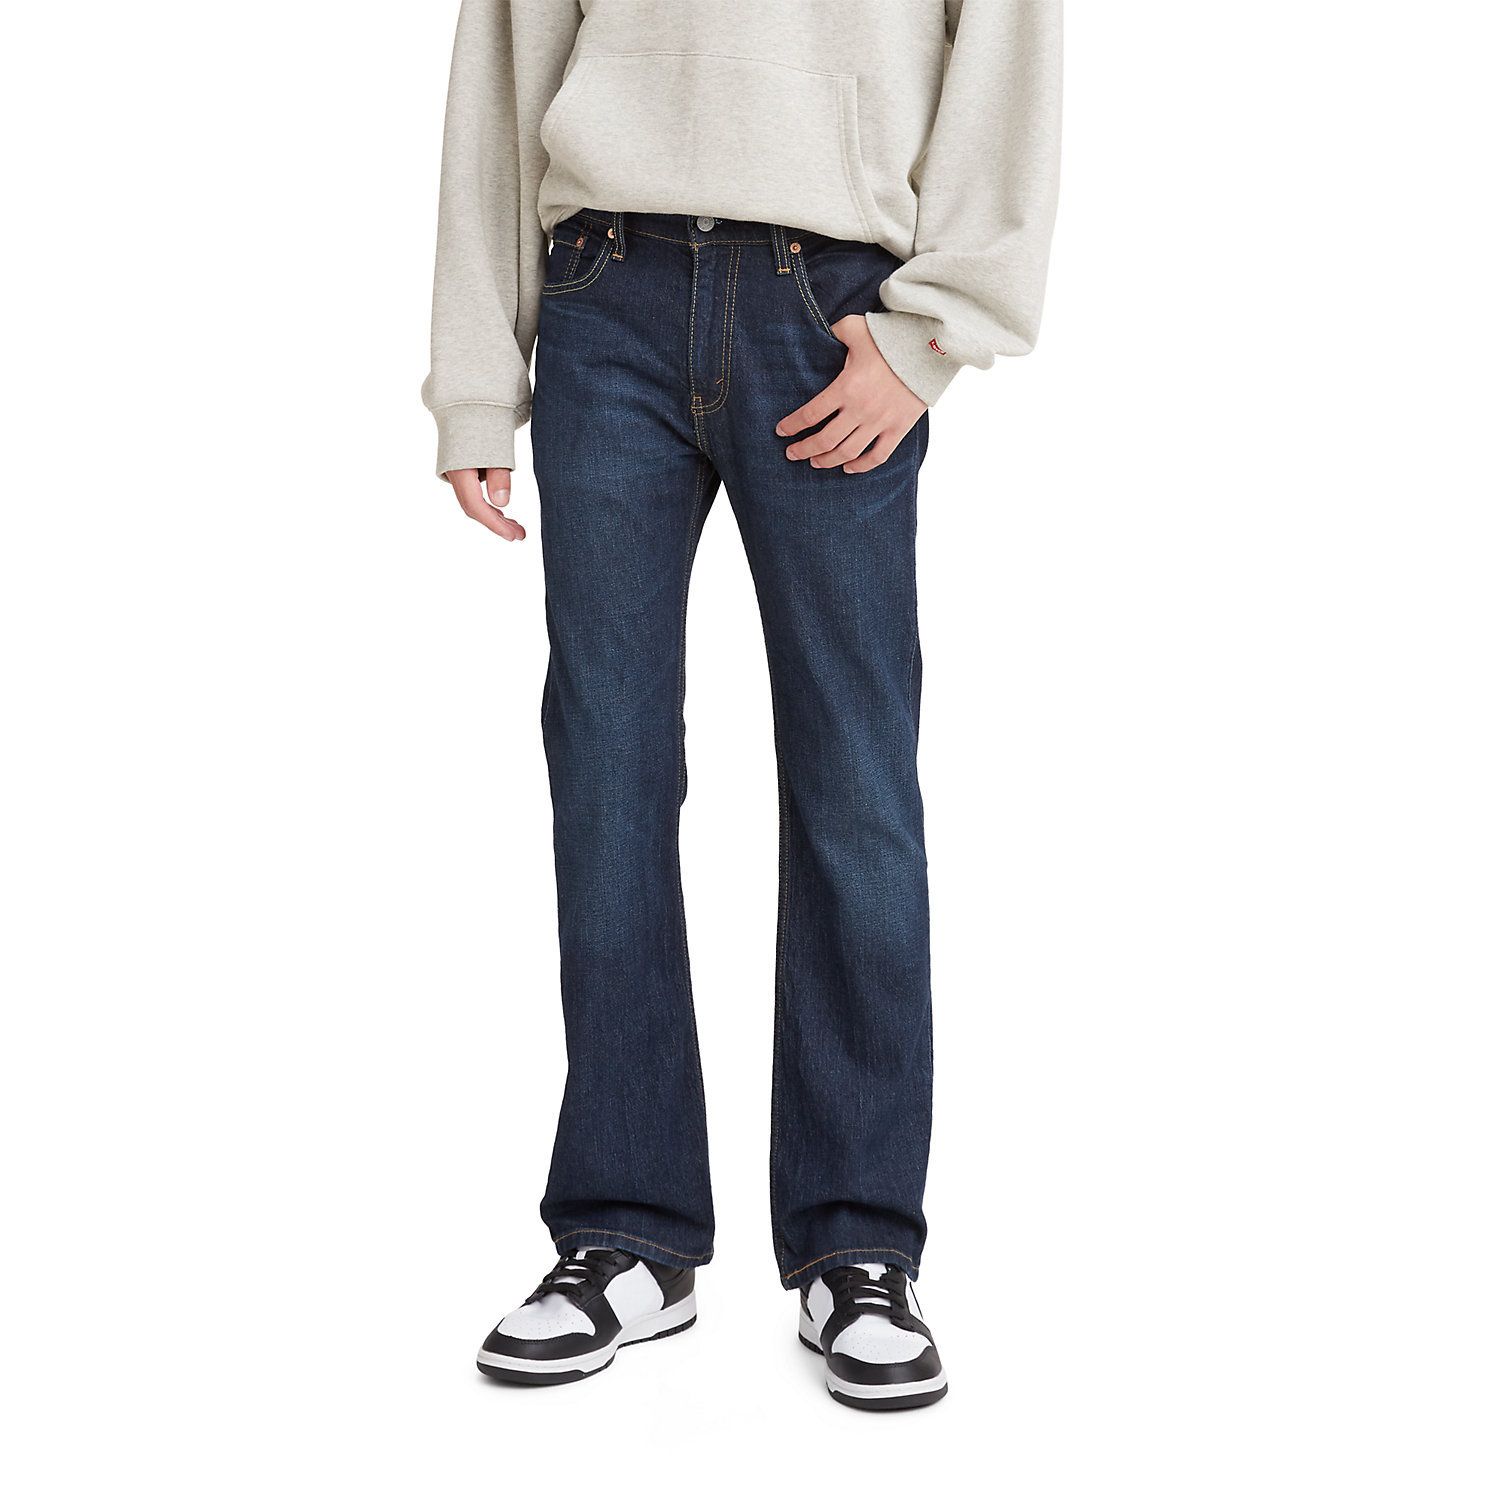 Image for Levi's Men's 527™ Stretch Slim Bootcut Jeans at Kohl's.